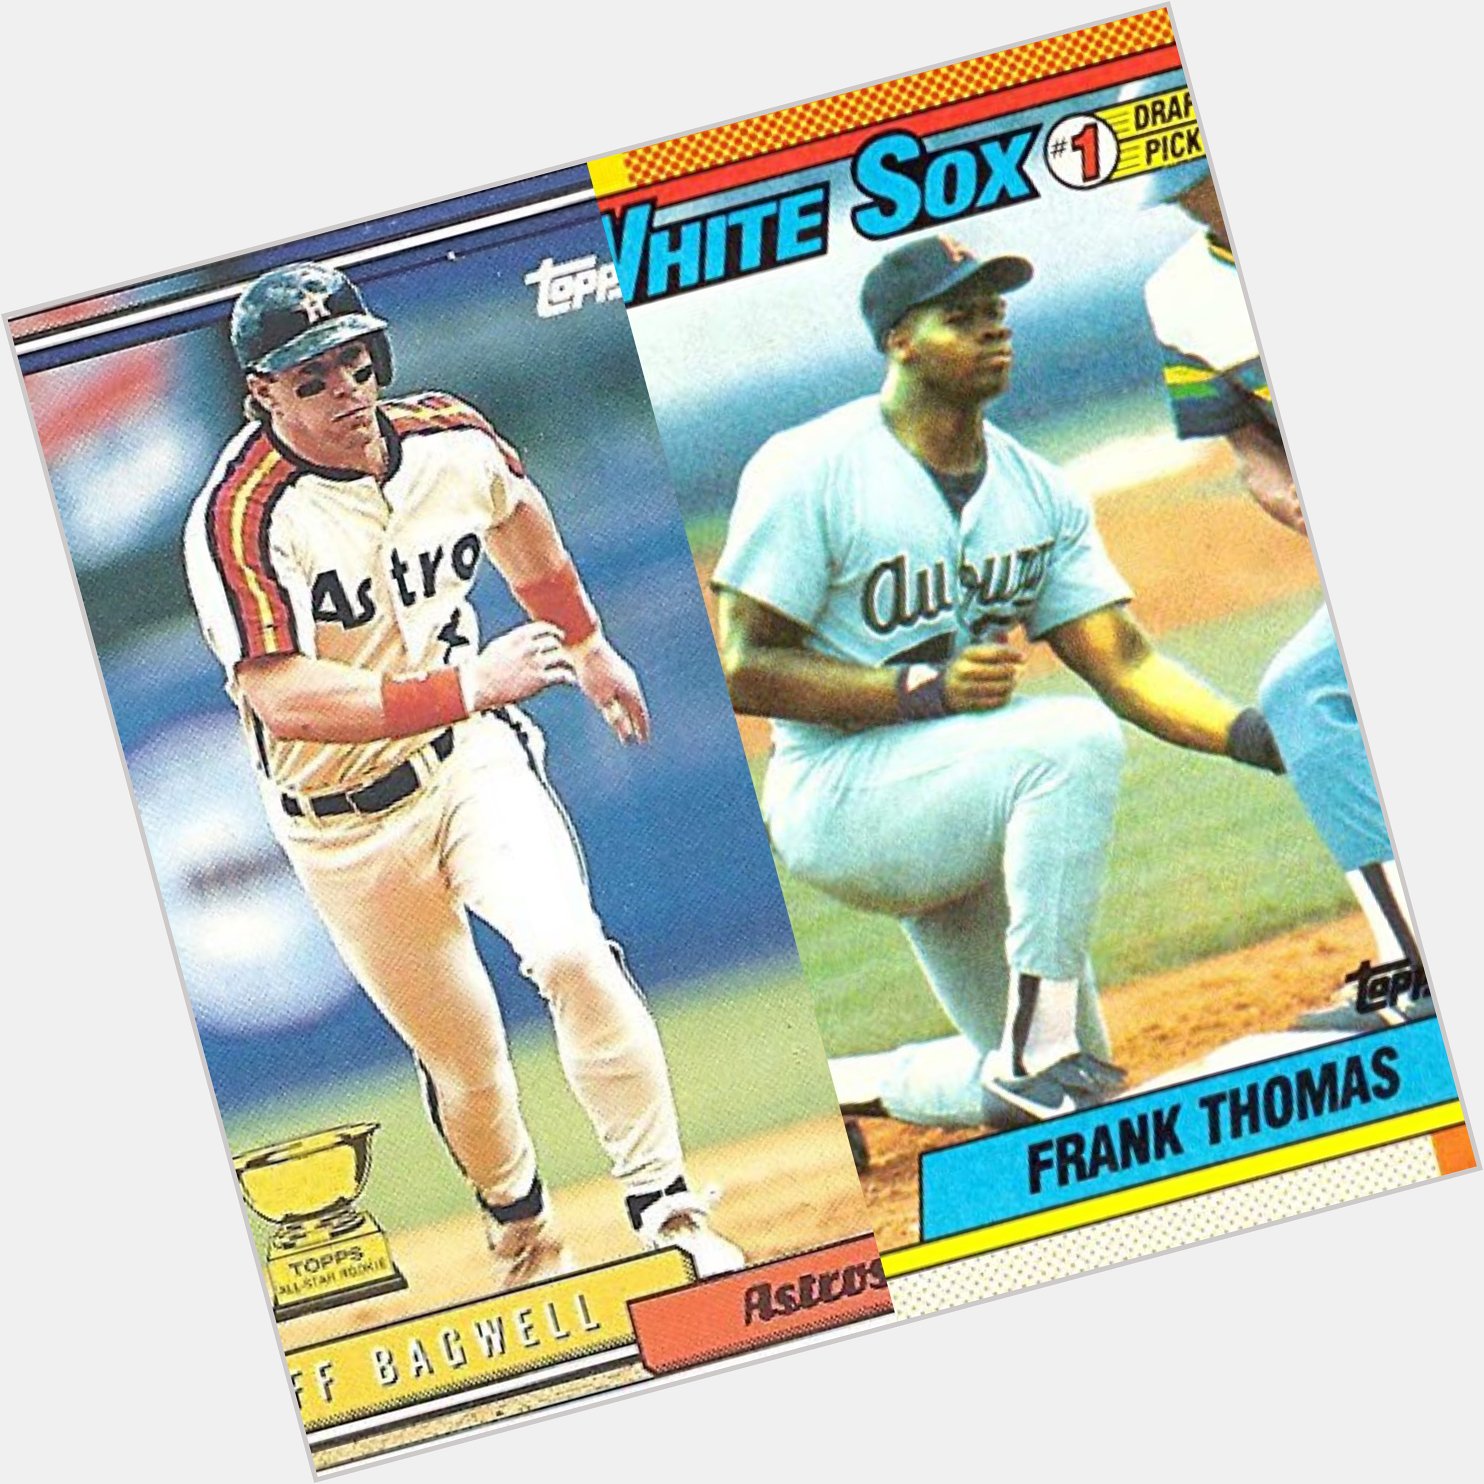 Happy Birthday Jeff Bagwell and Frank Thomas!

Draft one and Trade one! 